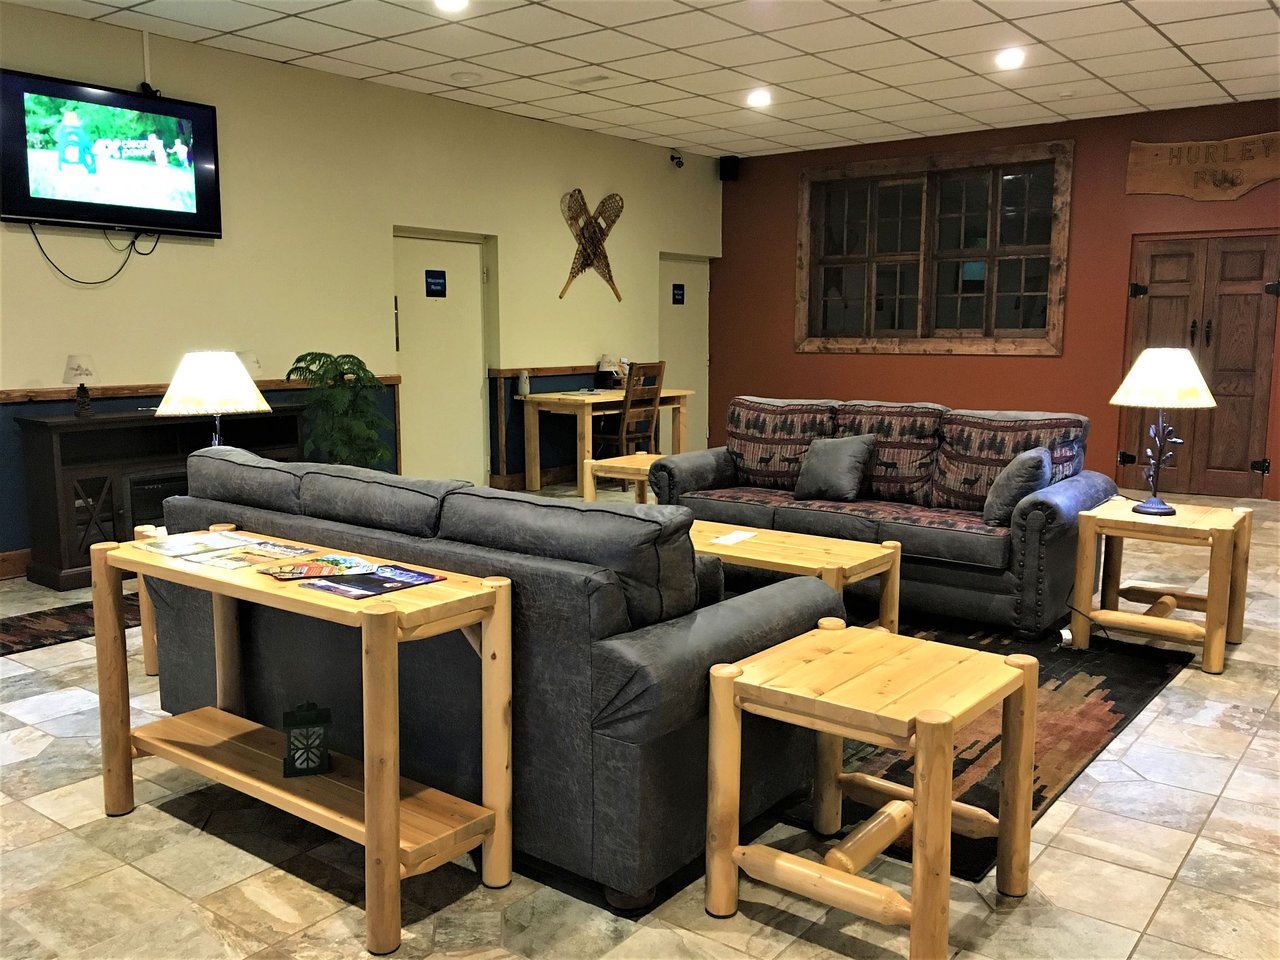 Birchwood Fireplace Inspirational the Best Hotels In Iron Belt Wi for 2019 From $58